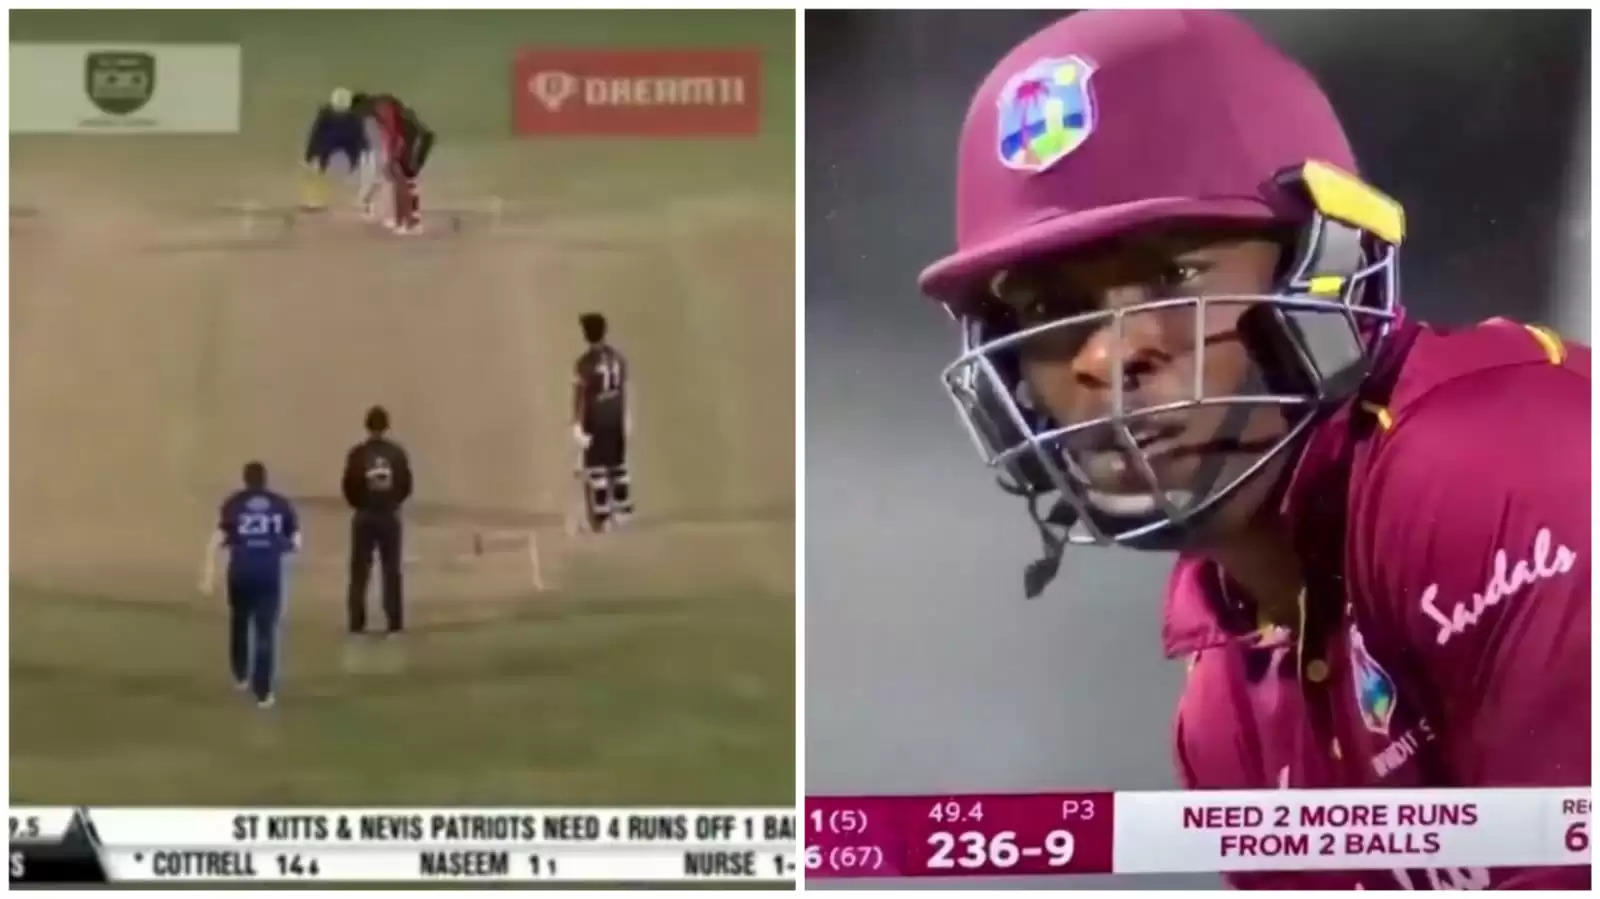 WATCH: For the second time, Sheldon Cottrell seals a game with a stunning six